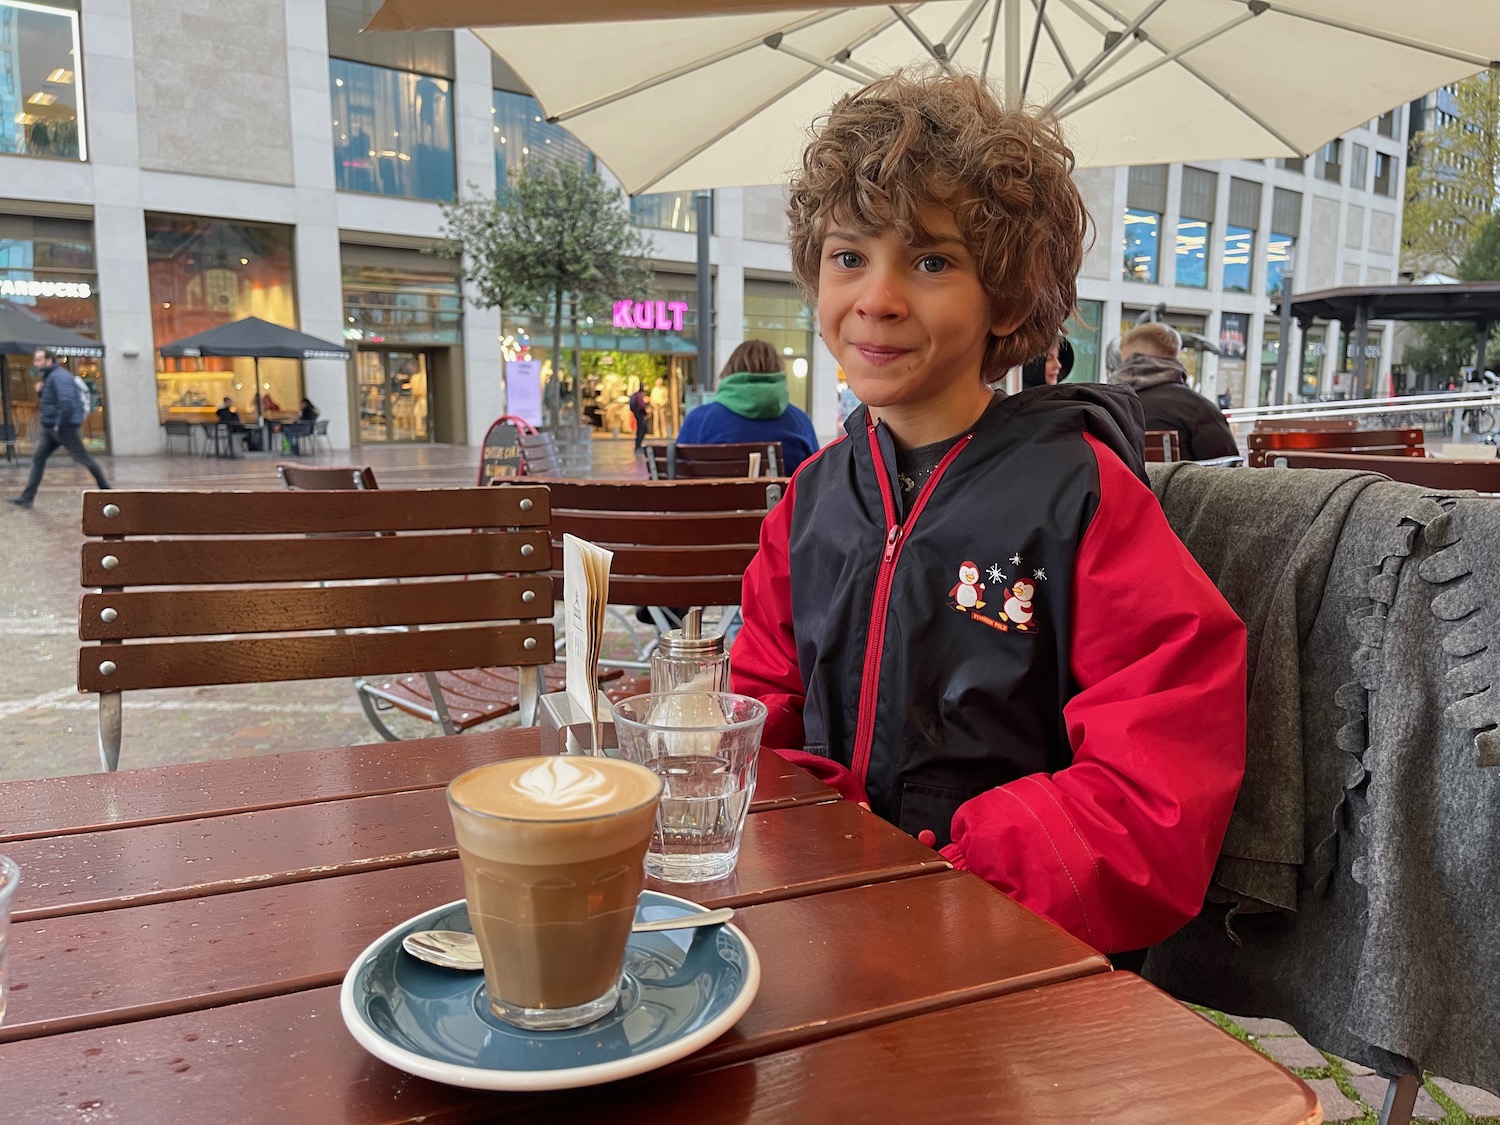 a boy sitting at a table with a cup of coffee